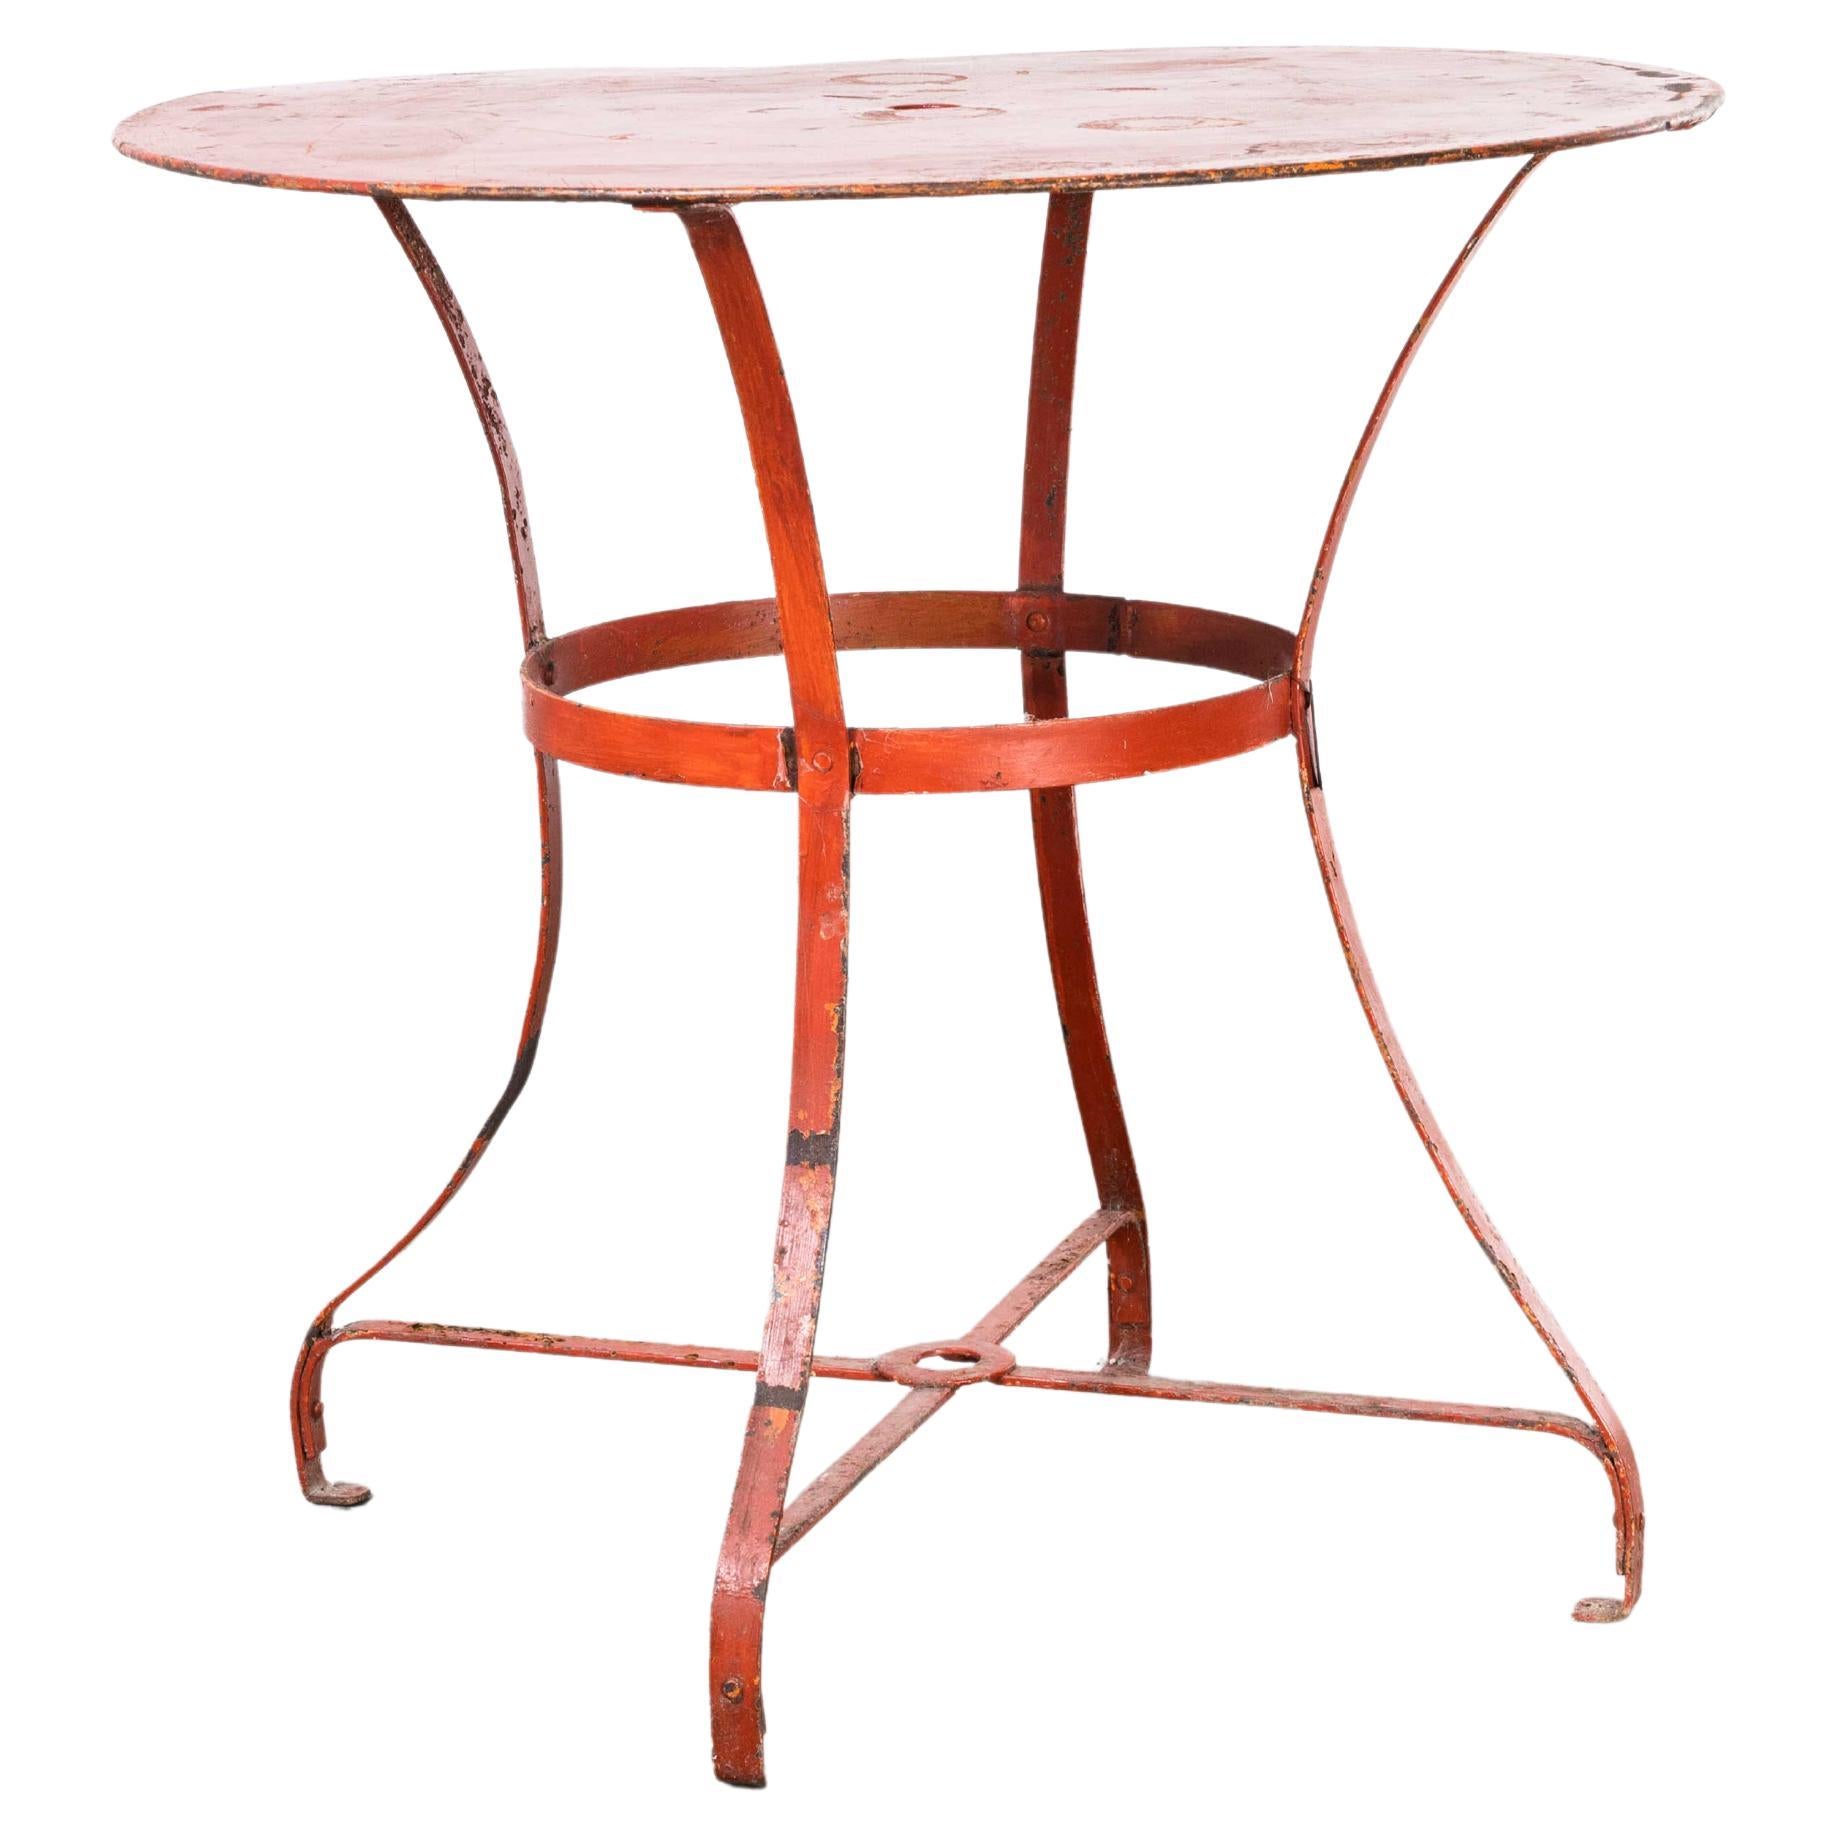 1950's Red Round French Metal Garden Dining Table For Sale